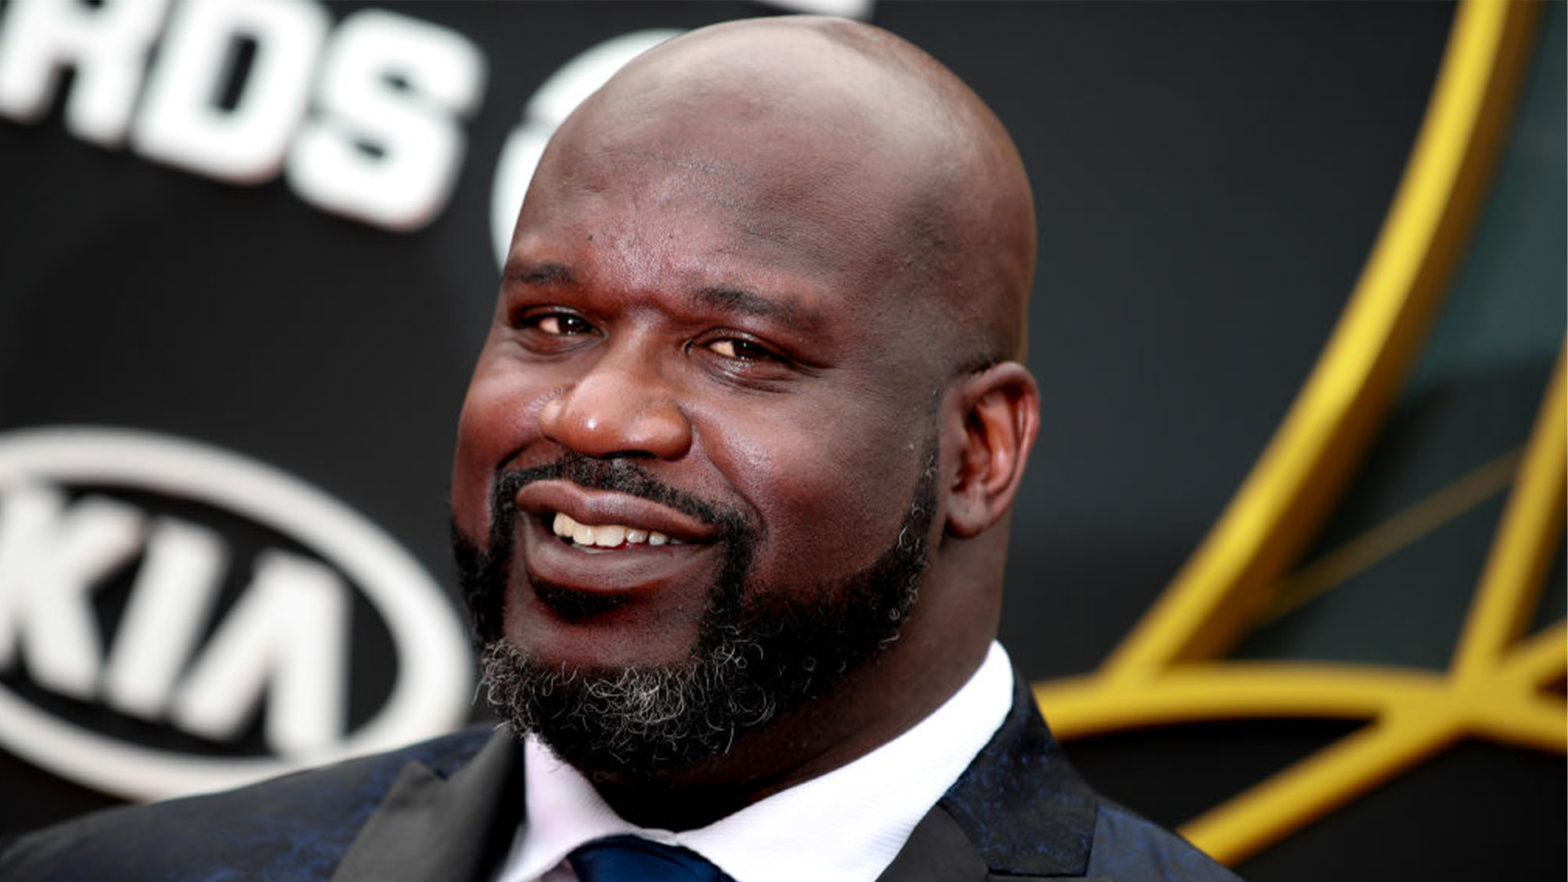 Shaquille O'Neal On The Media Poll That Asked The Public If He Was Worth $150M: 'I Like To Prove People Wrong'